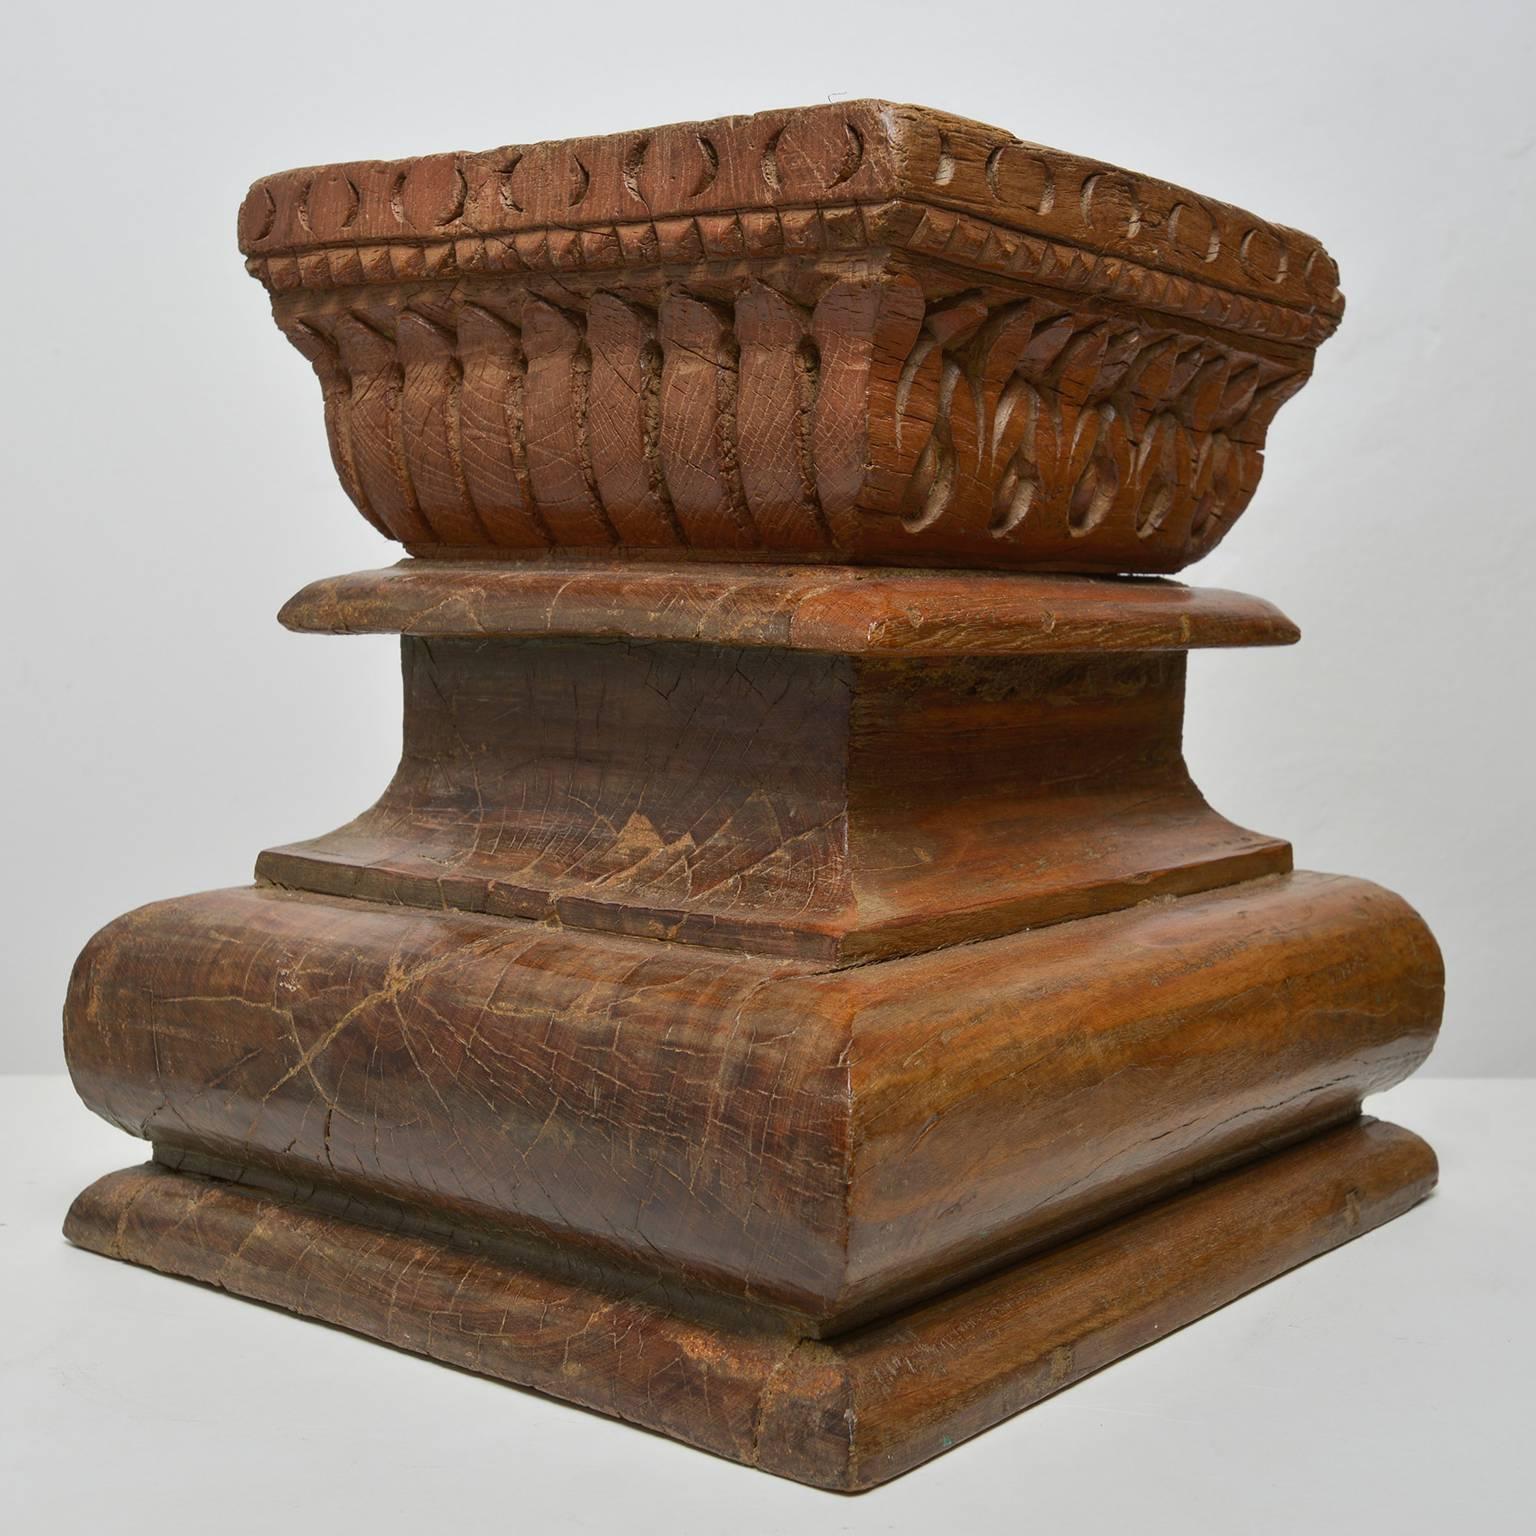 Agra Side Table or Stool, Old Asian Teak Sculpture Capitals